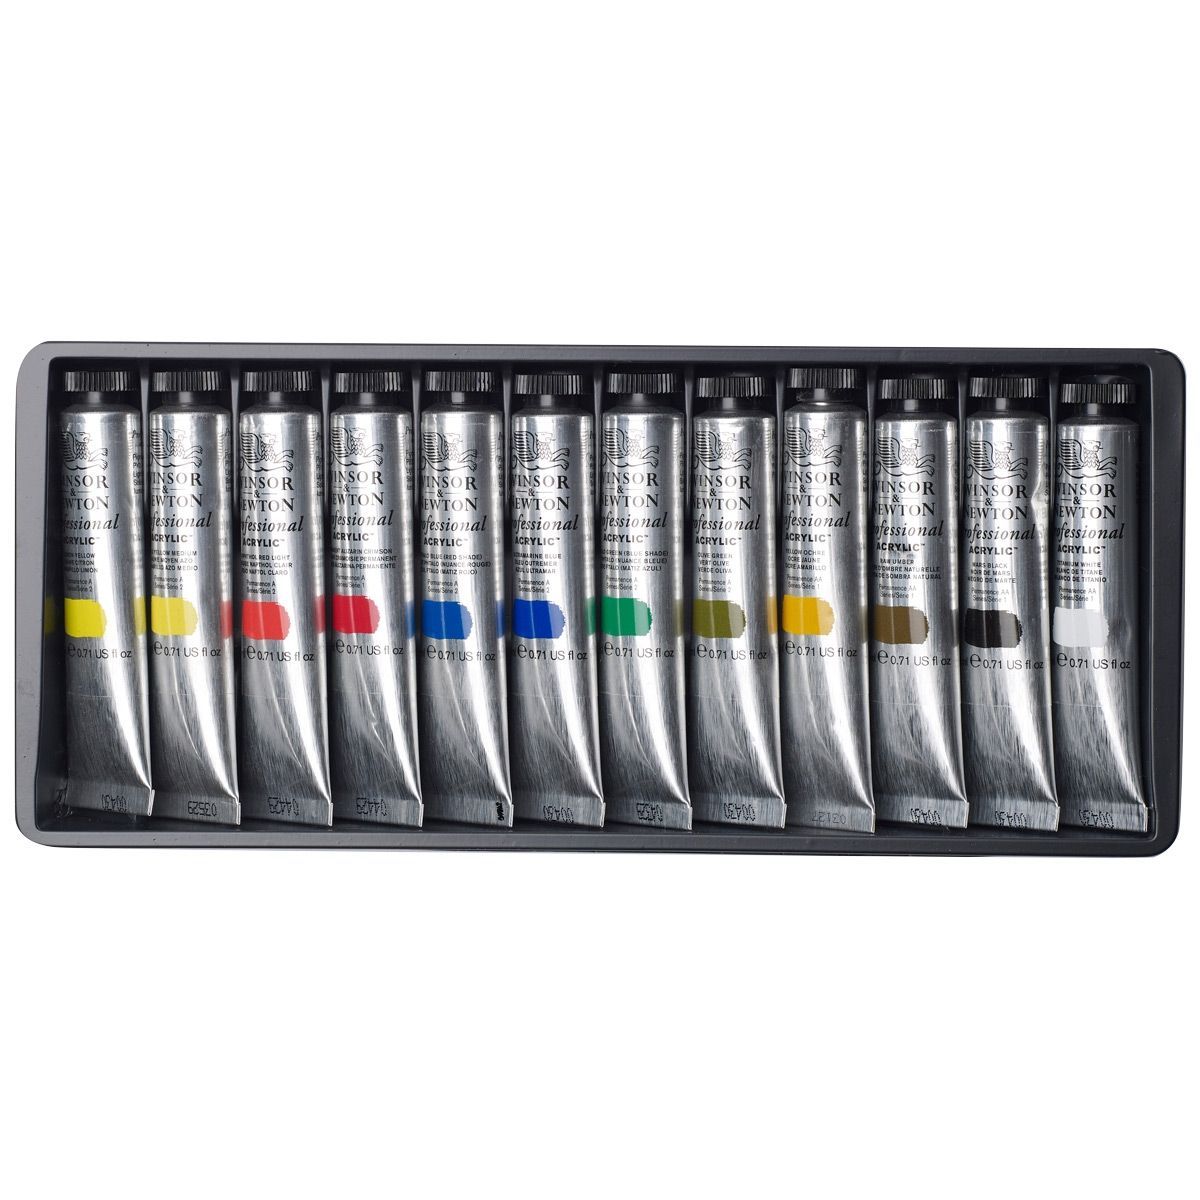 W & N Starter Set of 12, Professional Acrylics, Assorted Colors